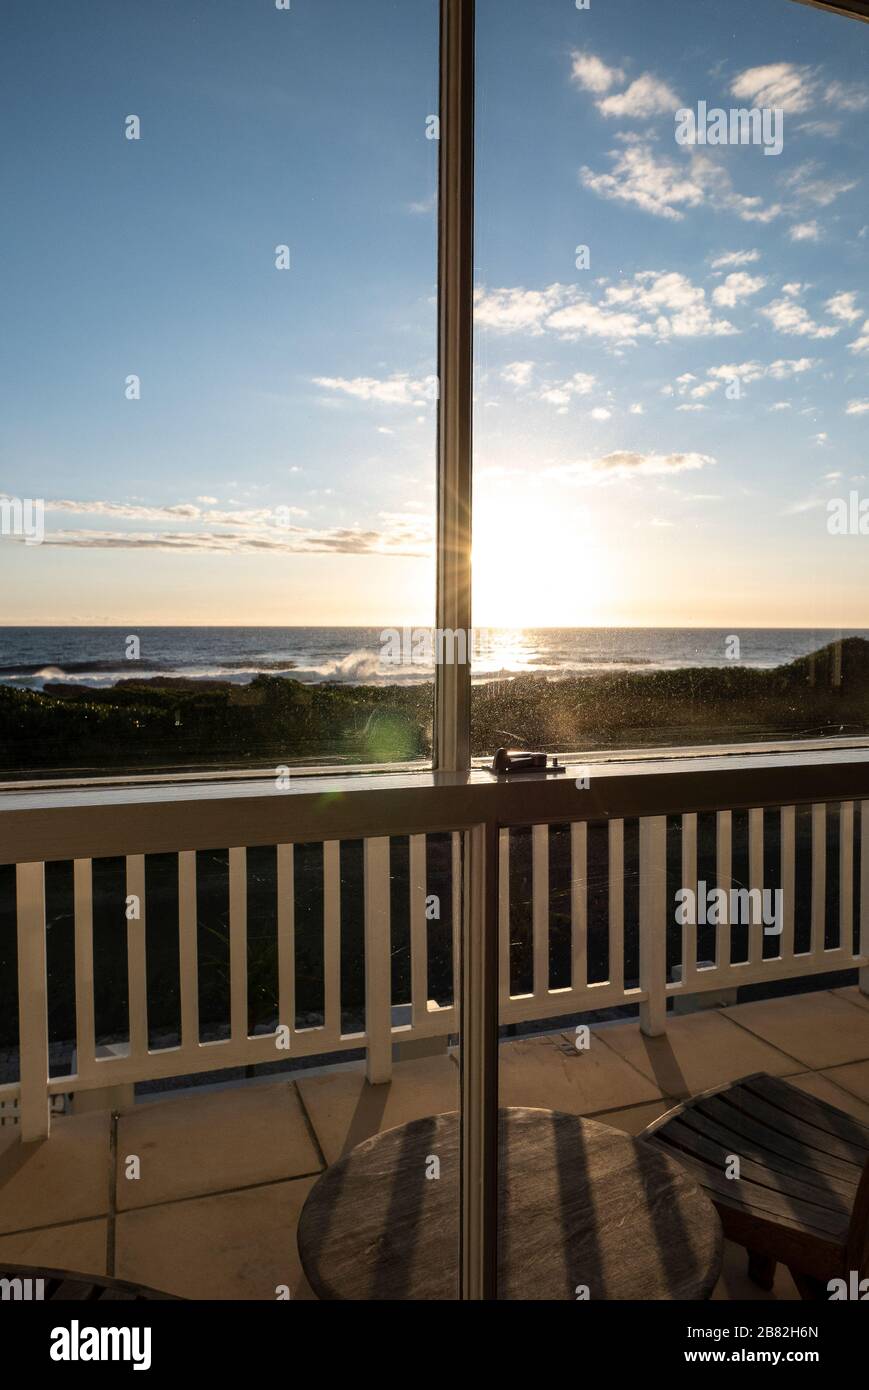 Balcony overlooking Beach at Sunset, Hermanus, Garden Route, South Africa Stock Photo